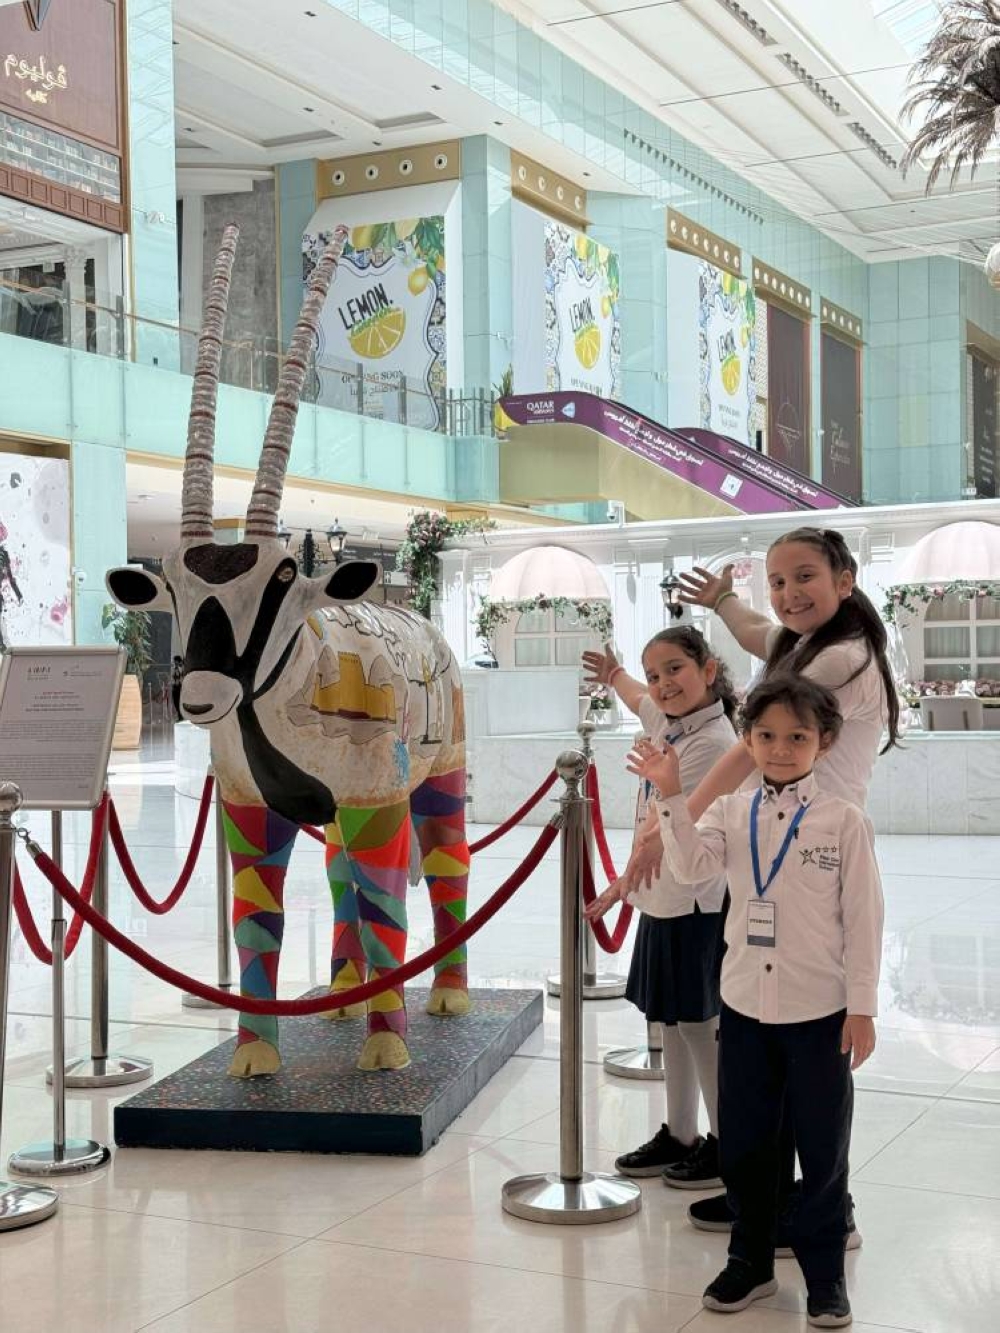 MoQ hosts Al-Maha Art Exhibition in tie-up with 10 educational institutions